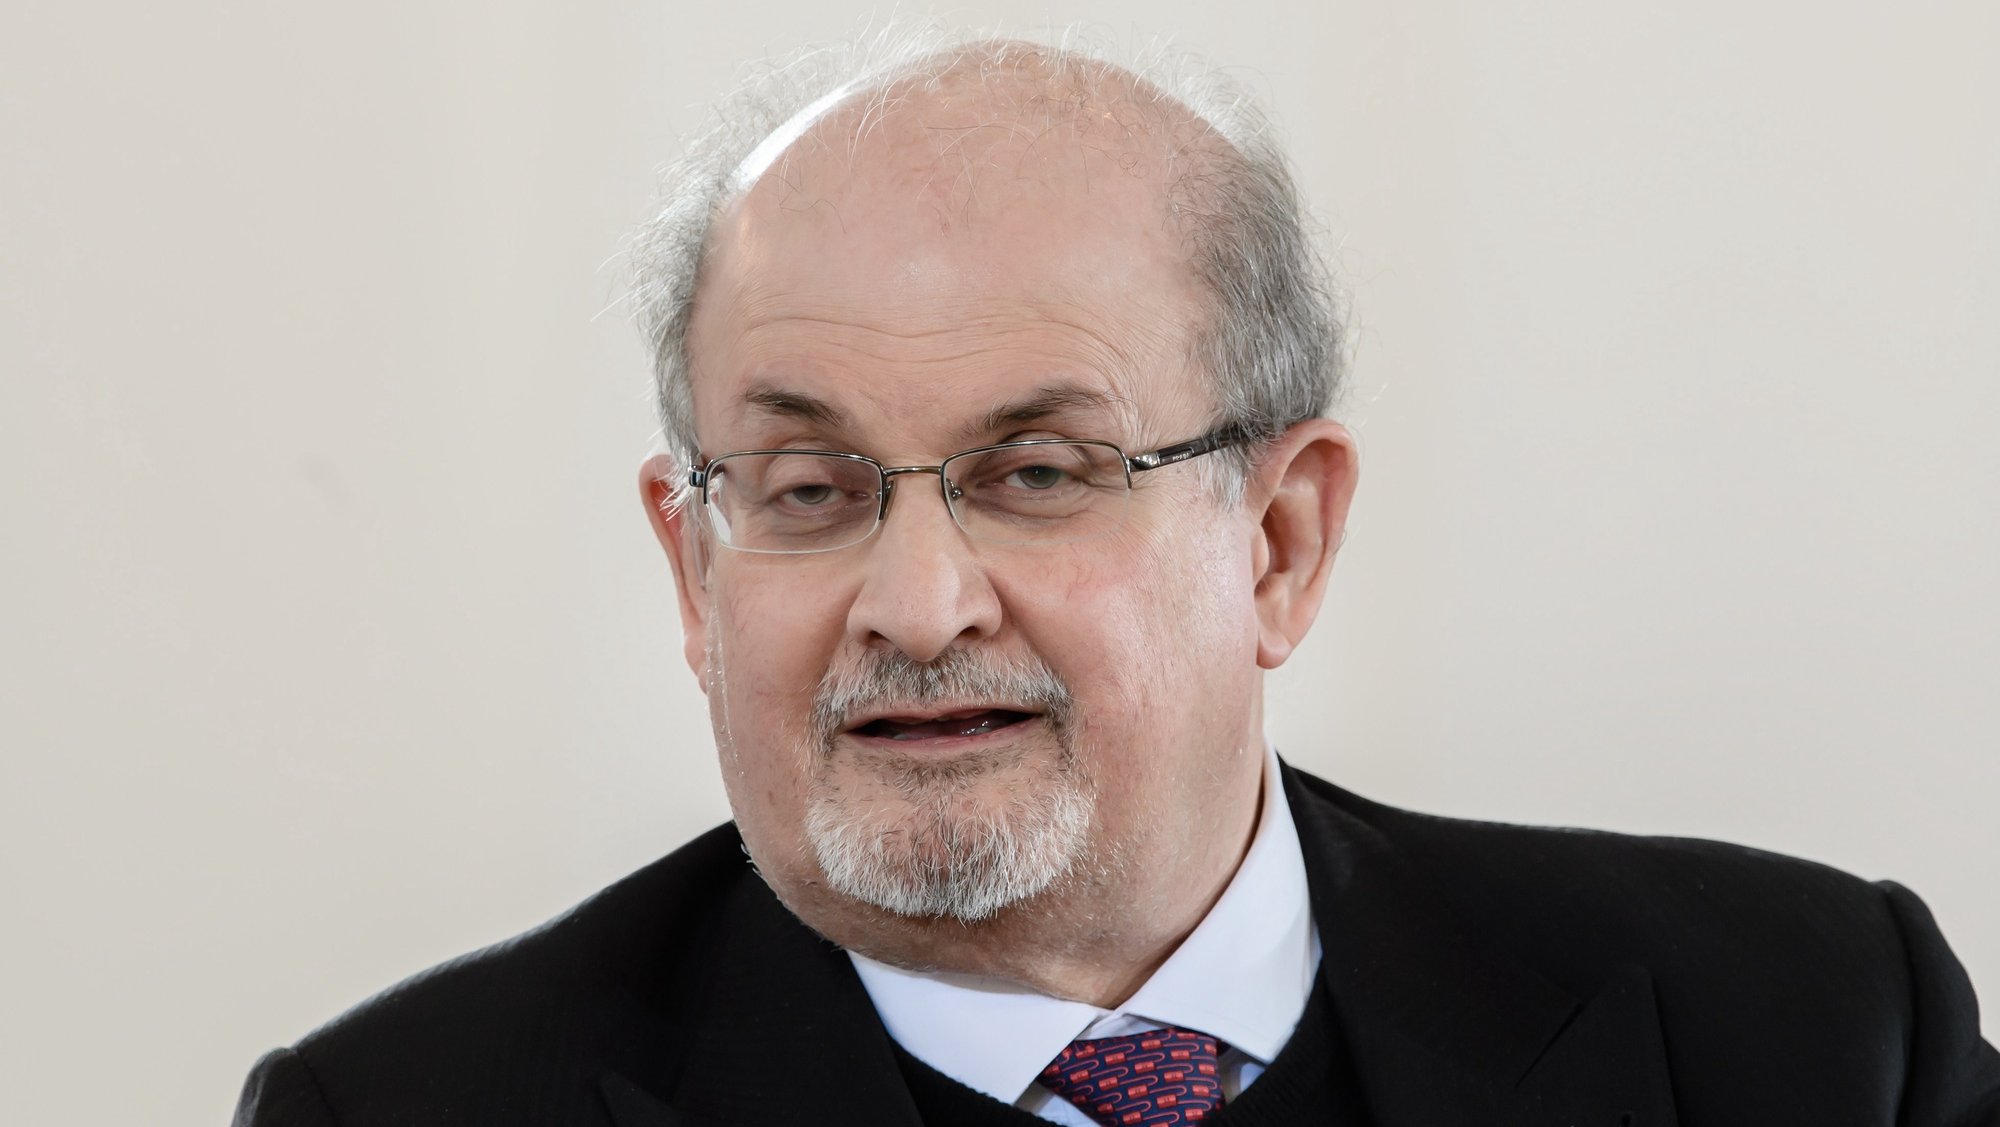 epa10117471 (FILE) - Indian-British writer Salman Rushdie speaks during a panel discussion within the second &#039;Forum Bellevue&#039; at the Bellevue Palace in Berlin, Germany, 30 November 2017 (reissued 12 August 2022). Rushdie and an interviewer were attacked while on stage at an event in Chautauqua, New York State, USA, on 12 August 2022. The suspect was taken into custody, New York State police said. Rushdie, who was apparently stabbed in the neck, was transported to a hospital. His condition is not yet known.  EPA/CLEMENS BILAN *** Local Caption *** 53928196